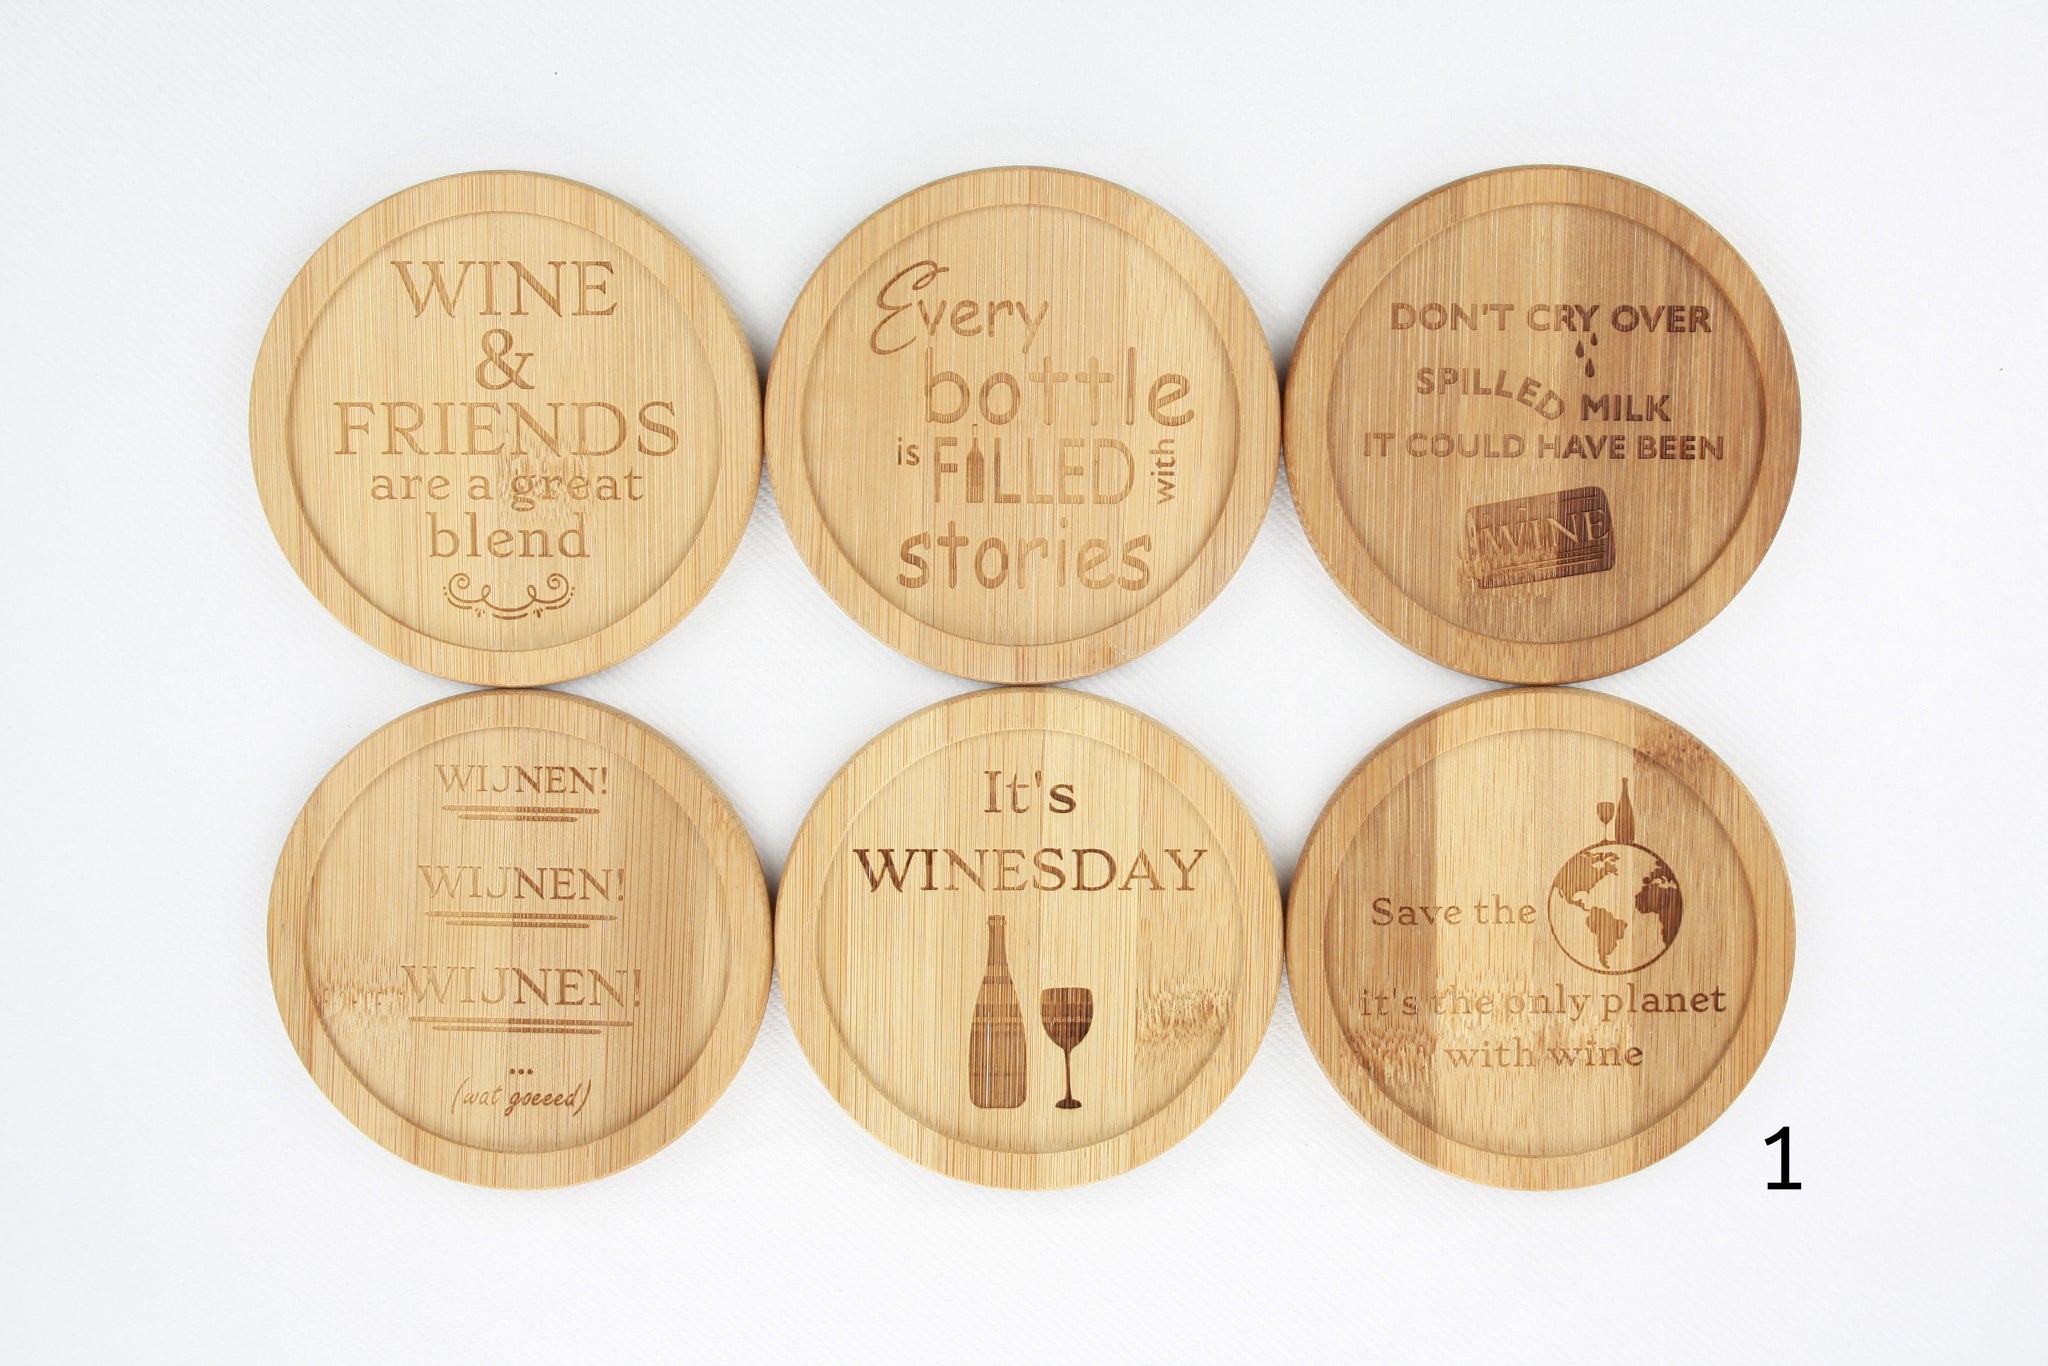 Bamboe onderleggers met wijn quotes. 'Wine and friends are a great blend', 'Every bottle is filled with stories', 'Don't cry over spilled milk, it could have been wine', 'Wijnen, wijnen, wijnen', 'It's winesday', 'Save the planet, it's the only planet with wine'.